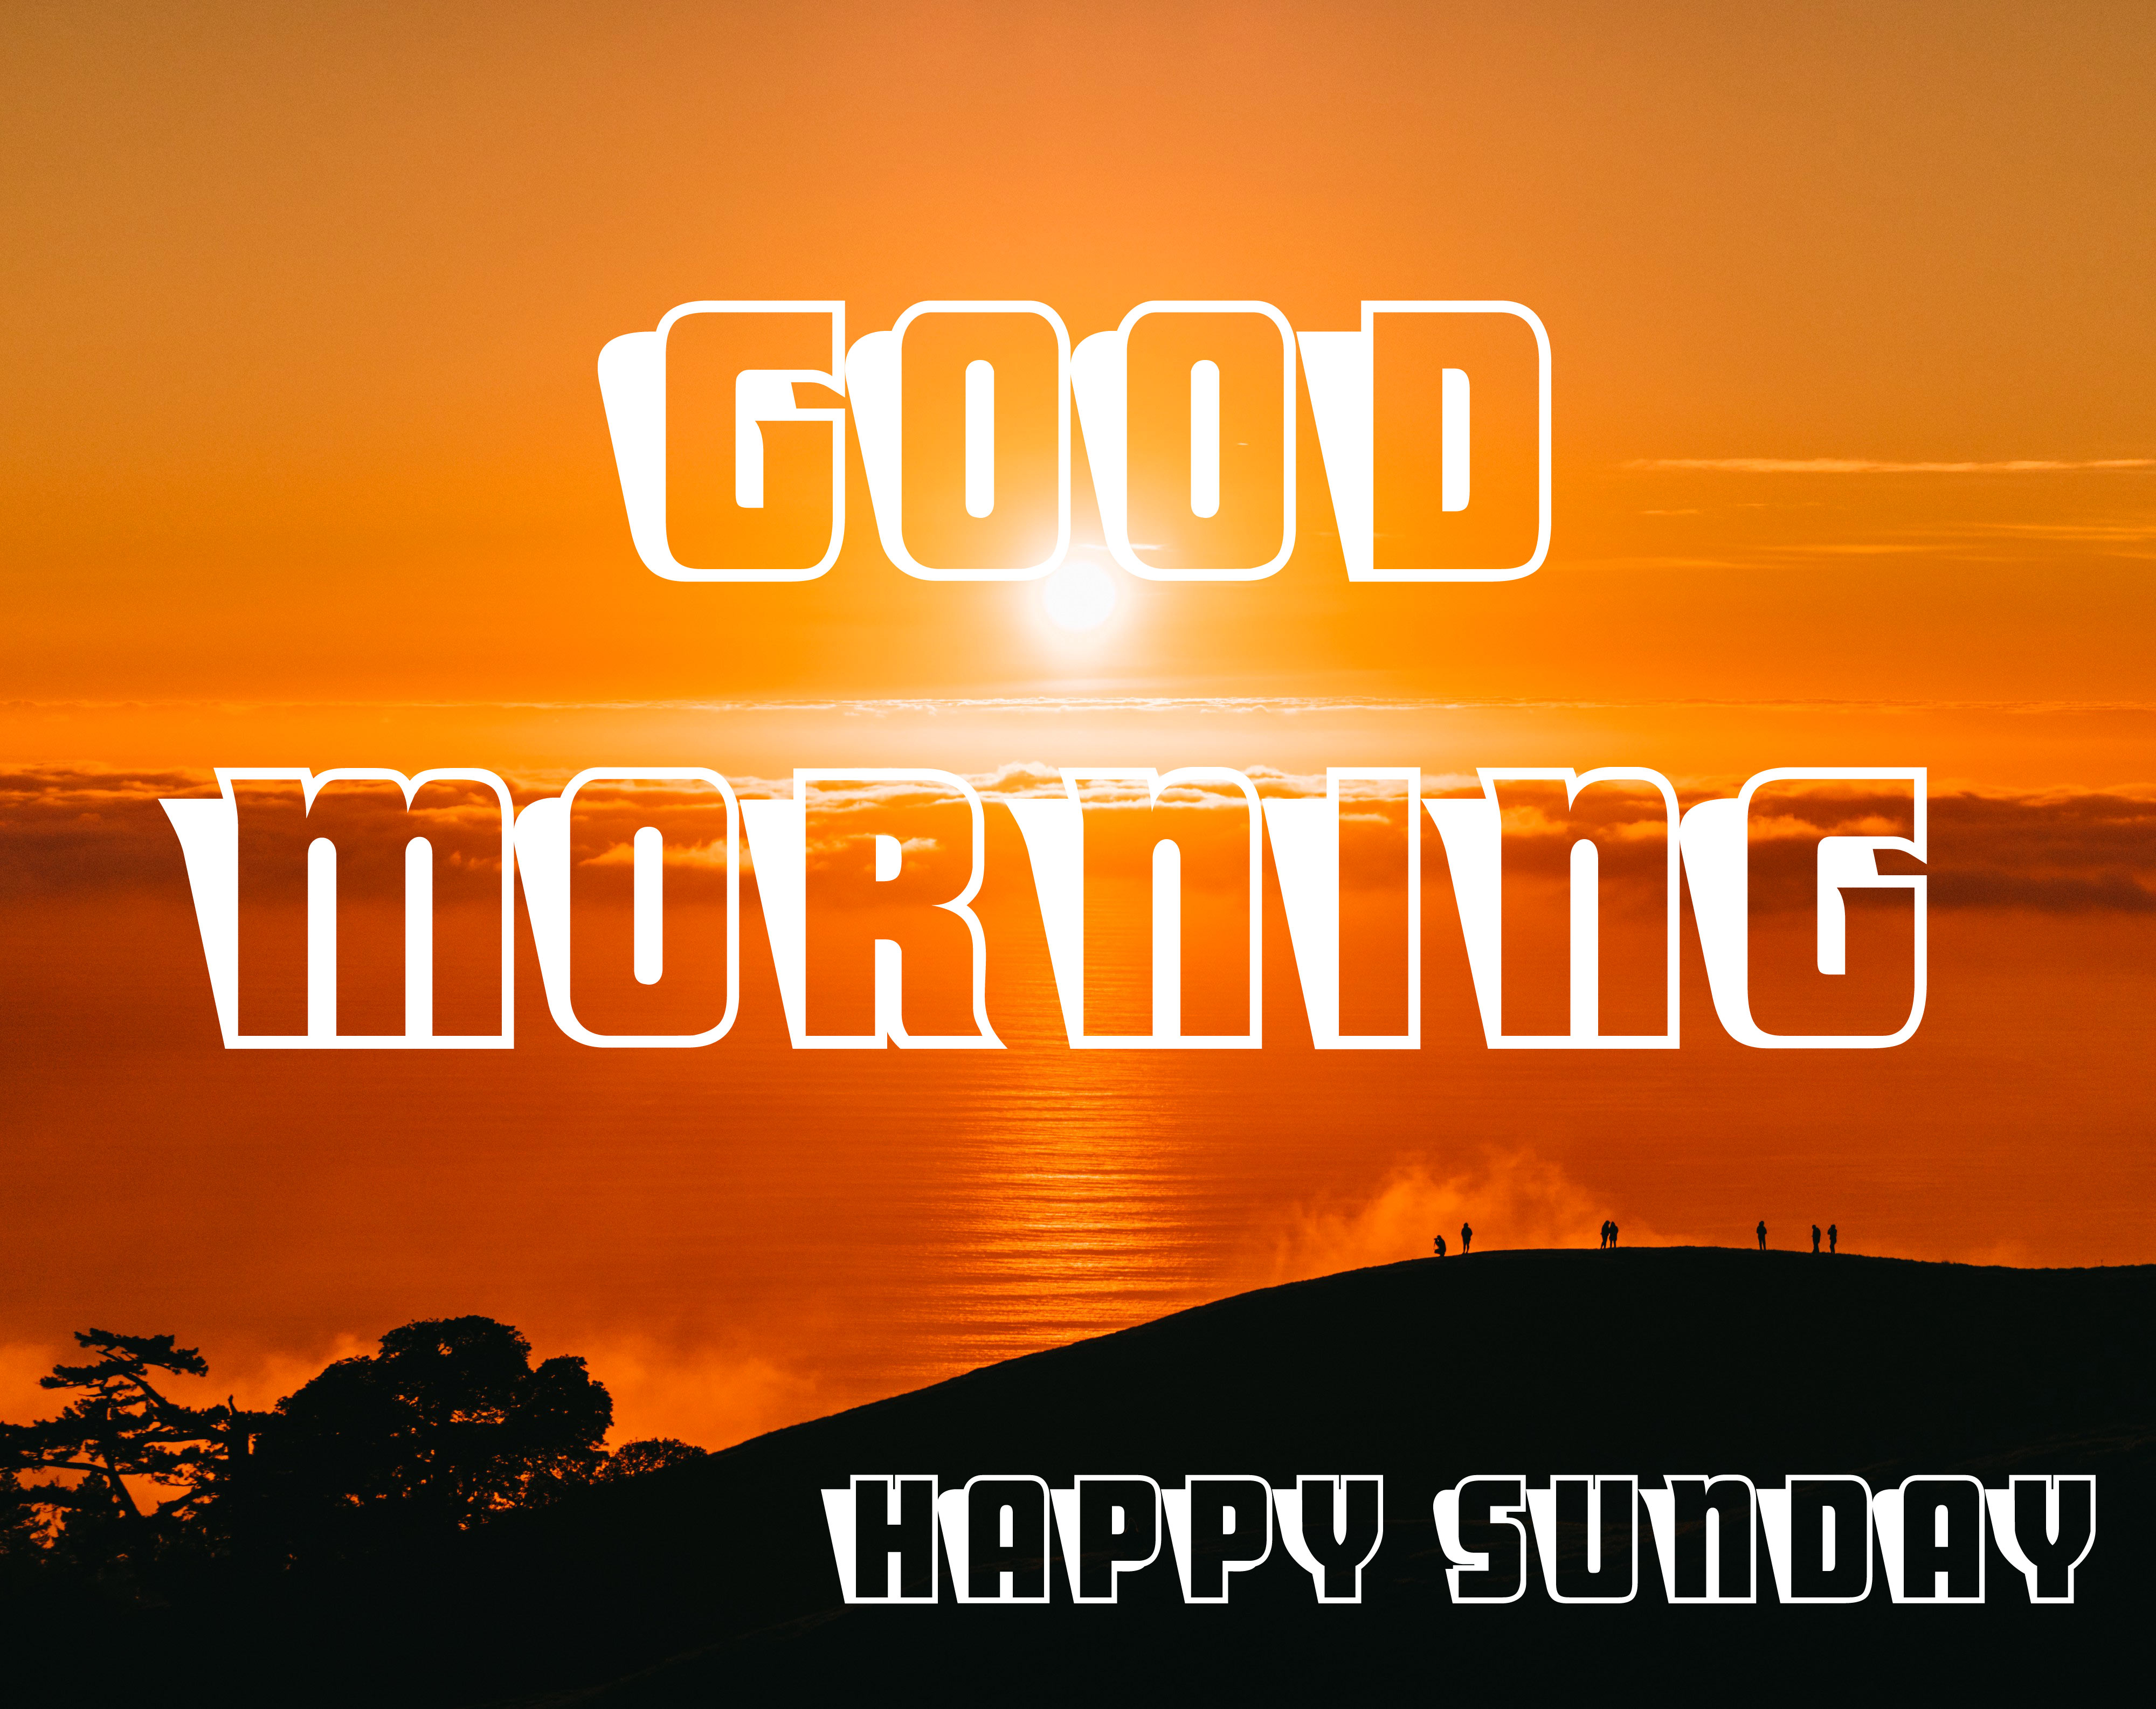 Sunday Good Morning Wishes Images Download